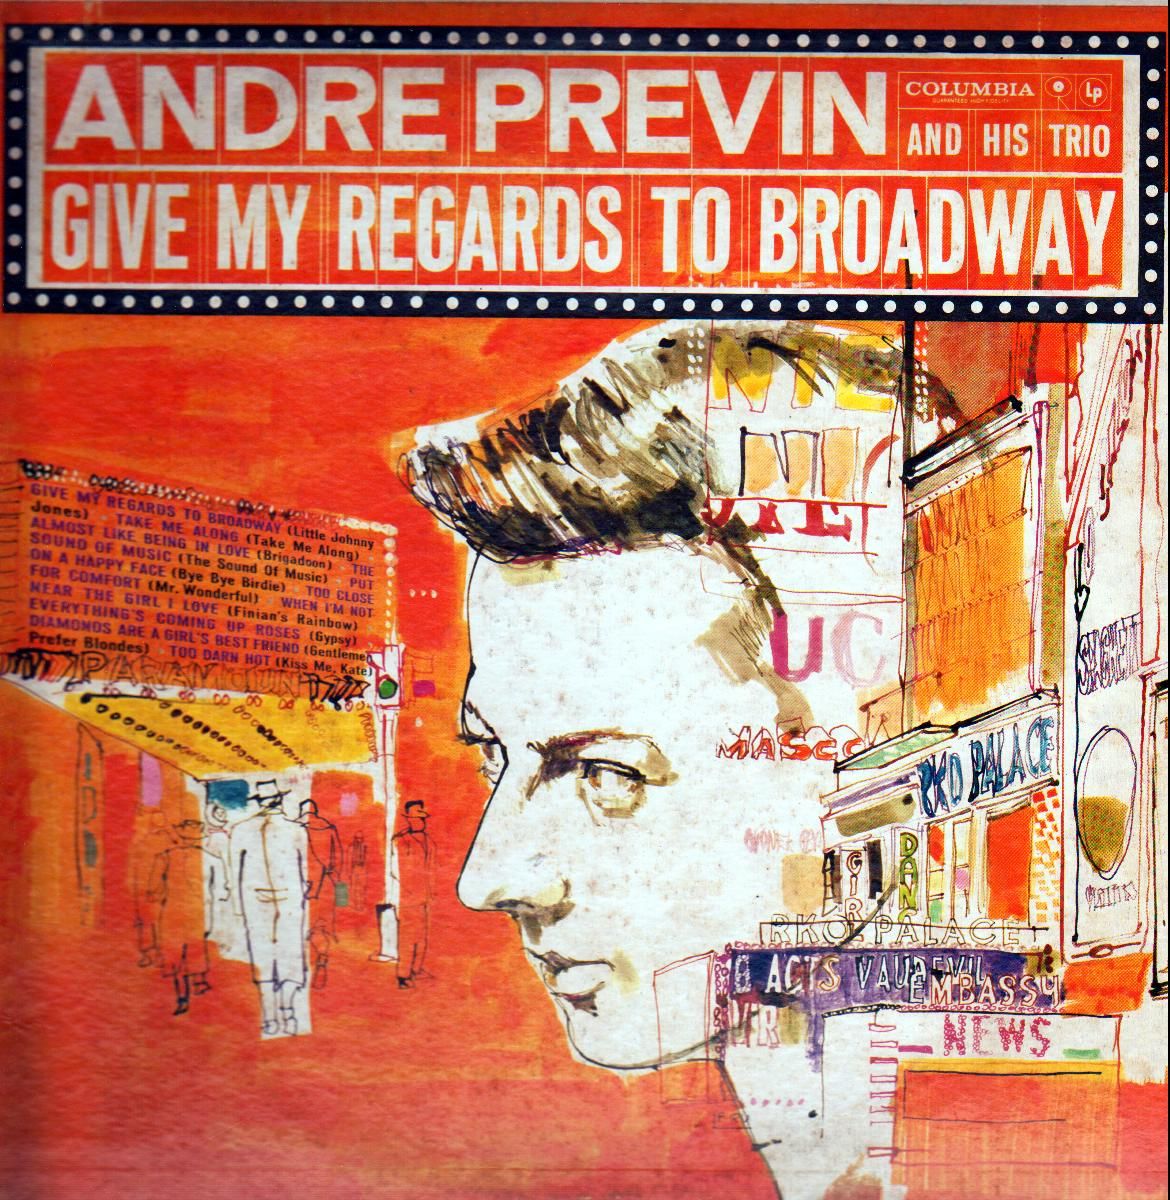 ANDRÉ PREVIN - Give My Regards To Broadway cover 